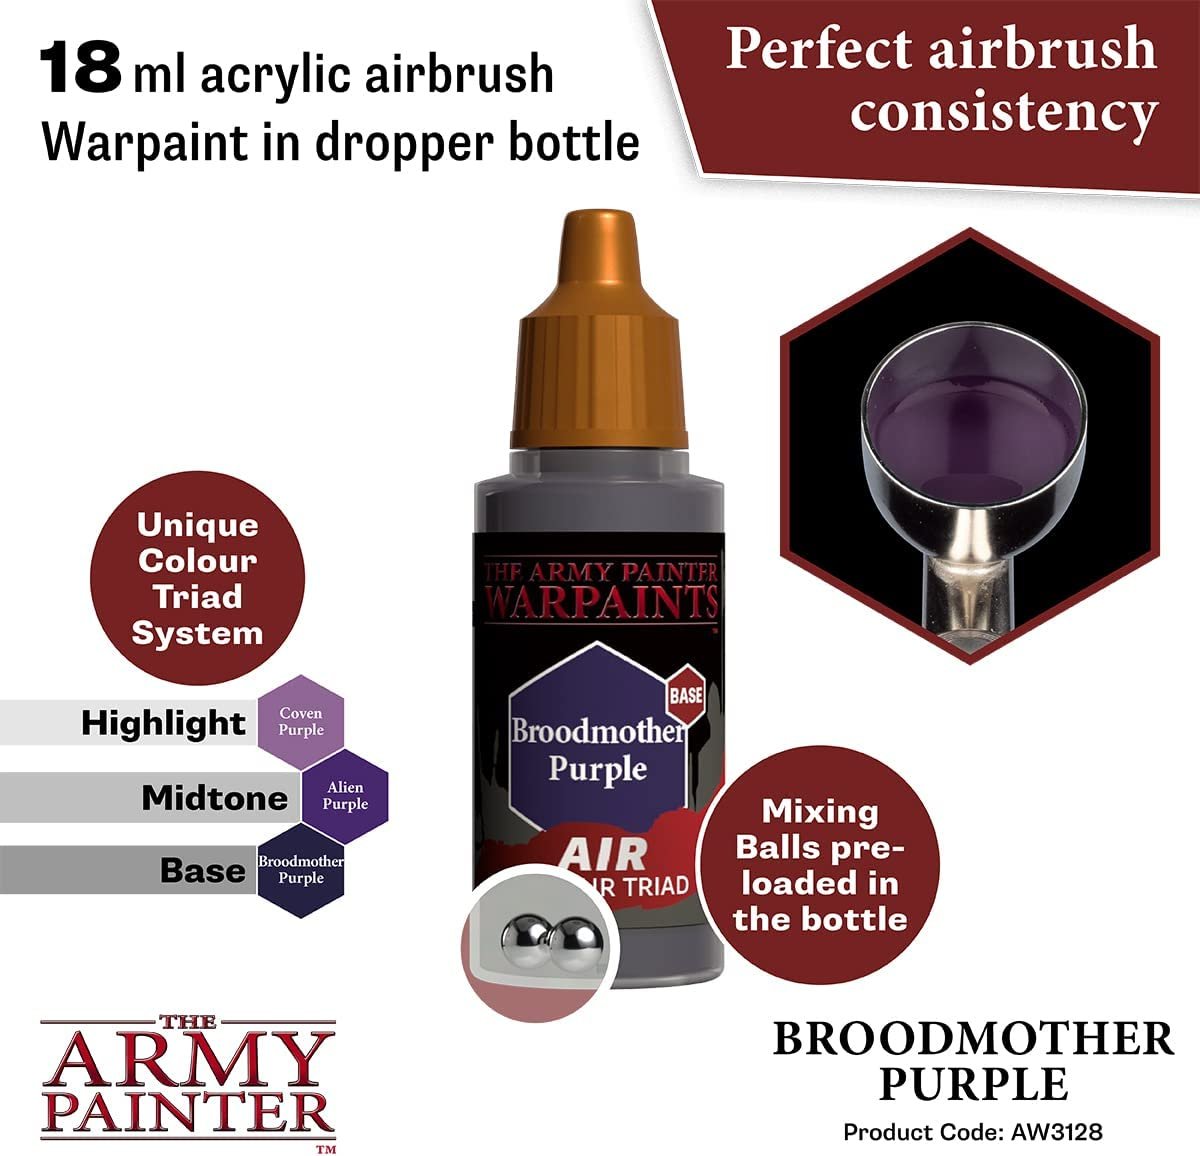 The Army Painter - Warpaints Air: Broodmother Purple (18ml/0.6oz)